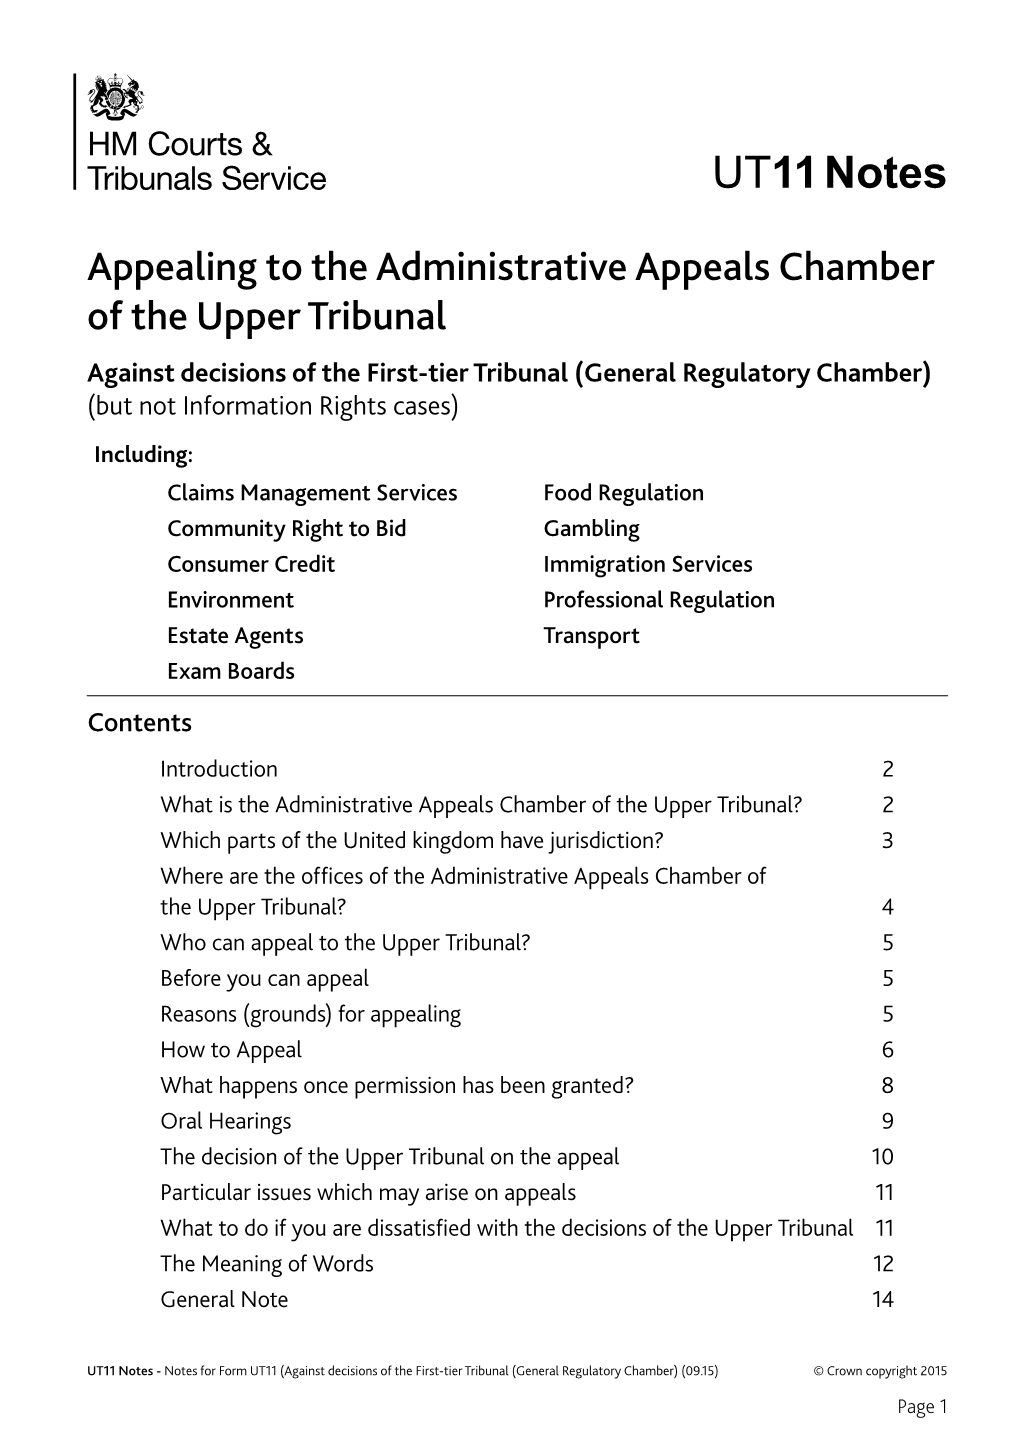 Appealing to the Administrative Appeals Chamber of the Upper Tribunal